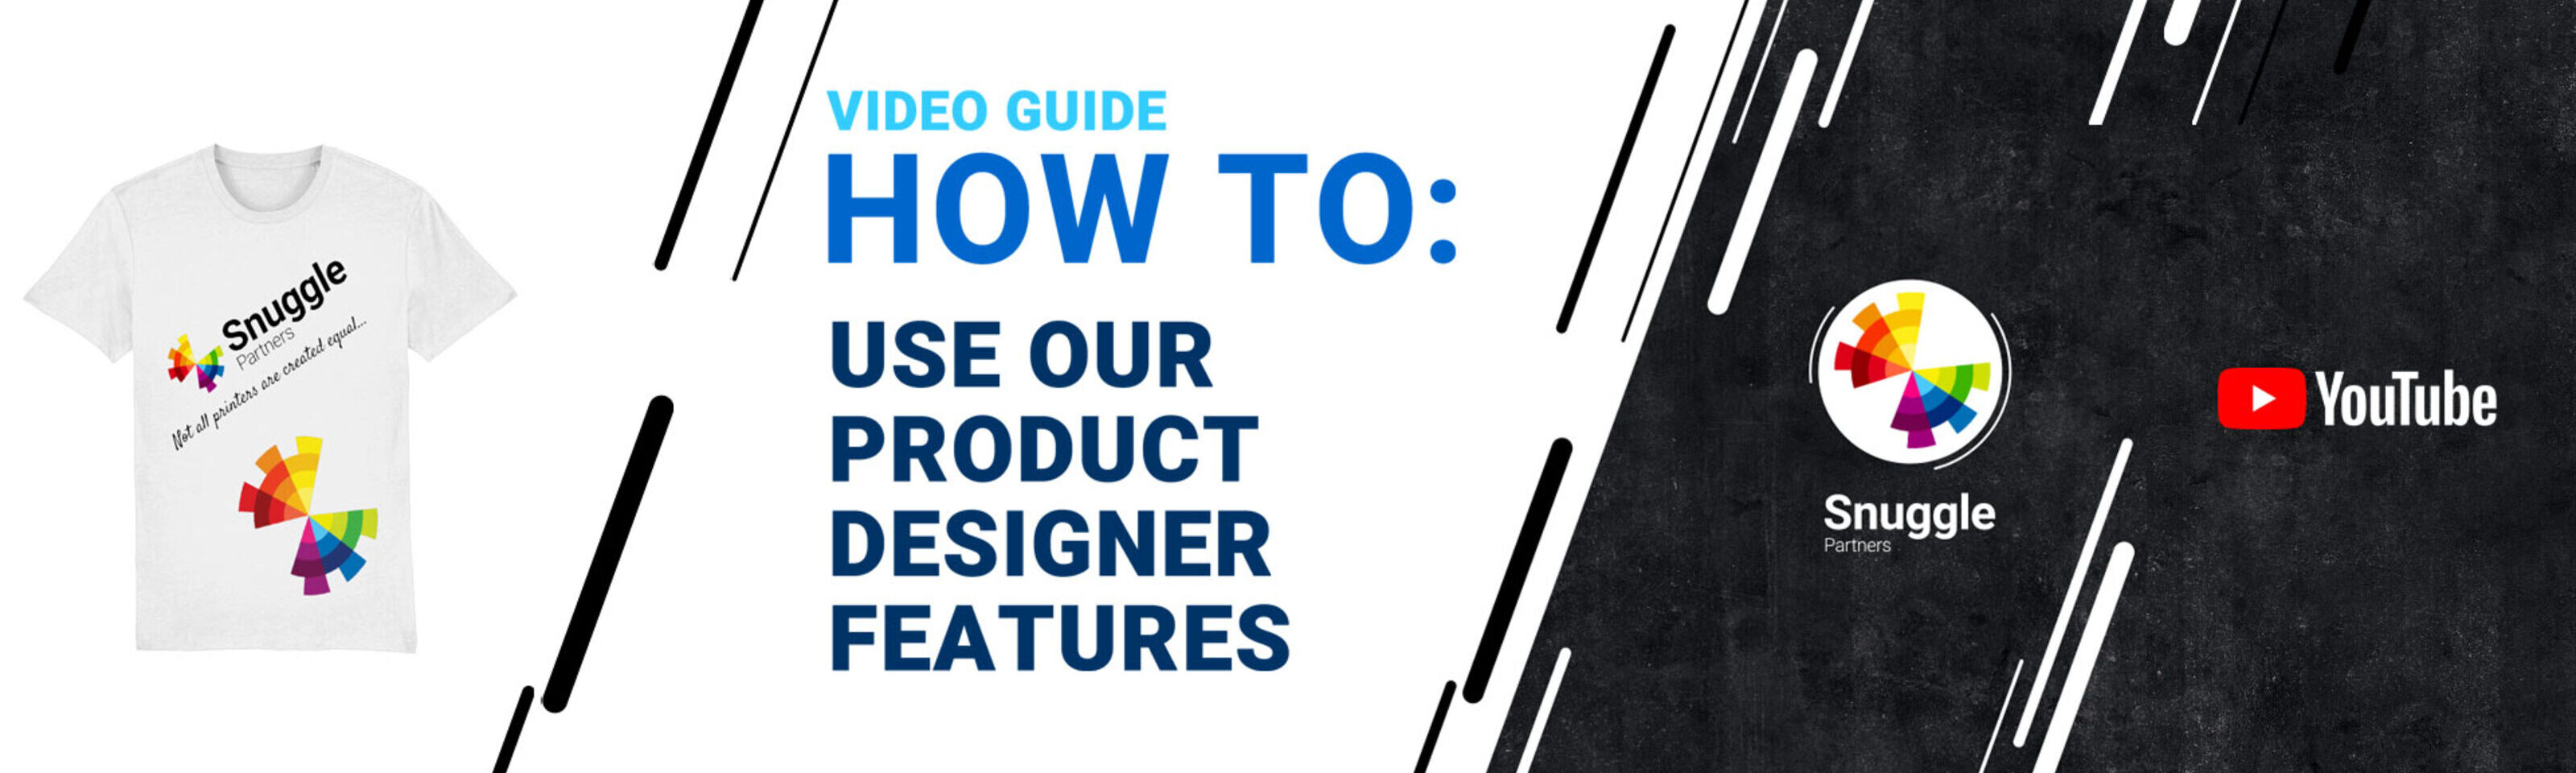 HOW TO: Use Our Product Designer Features